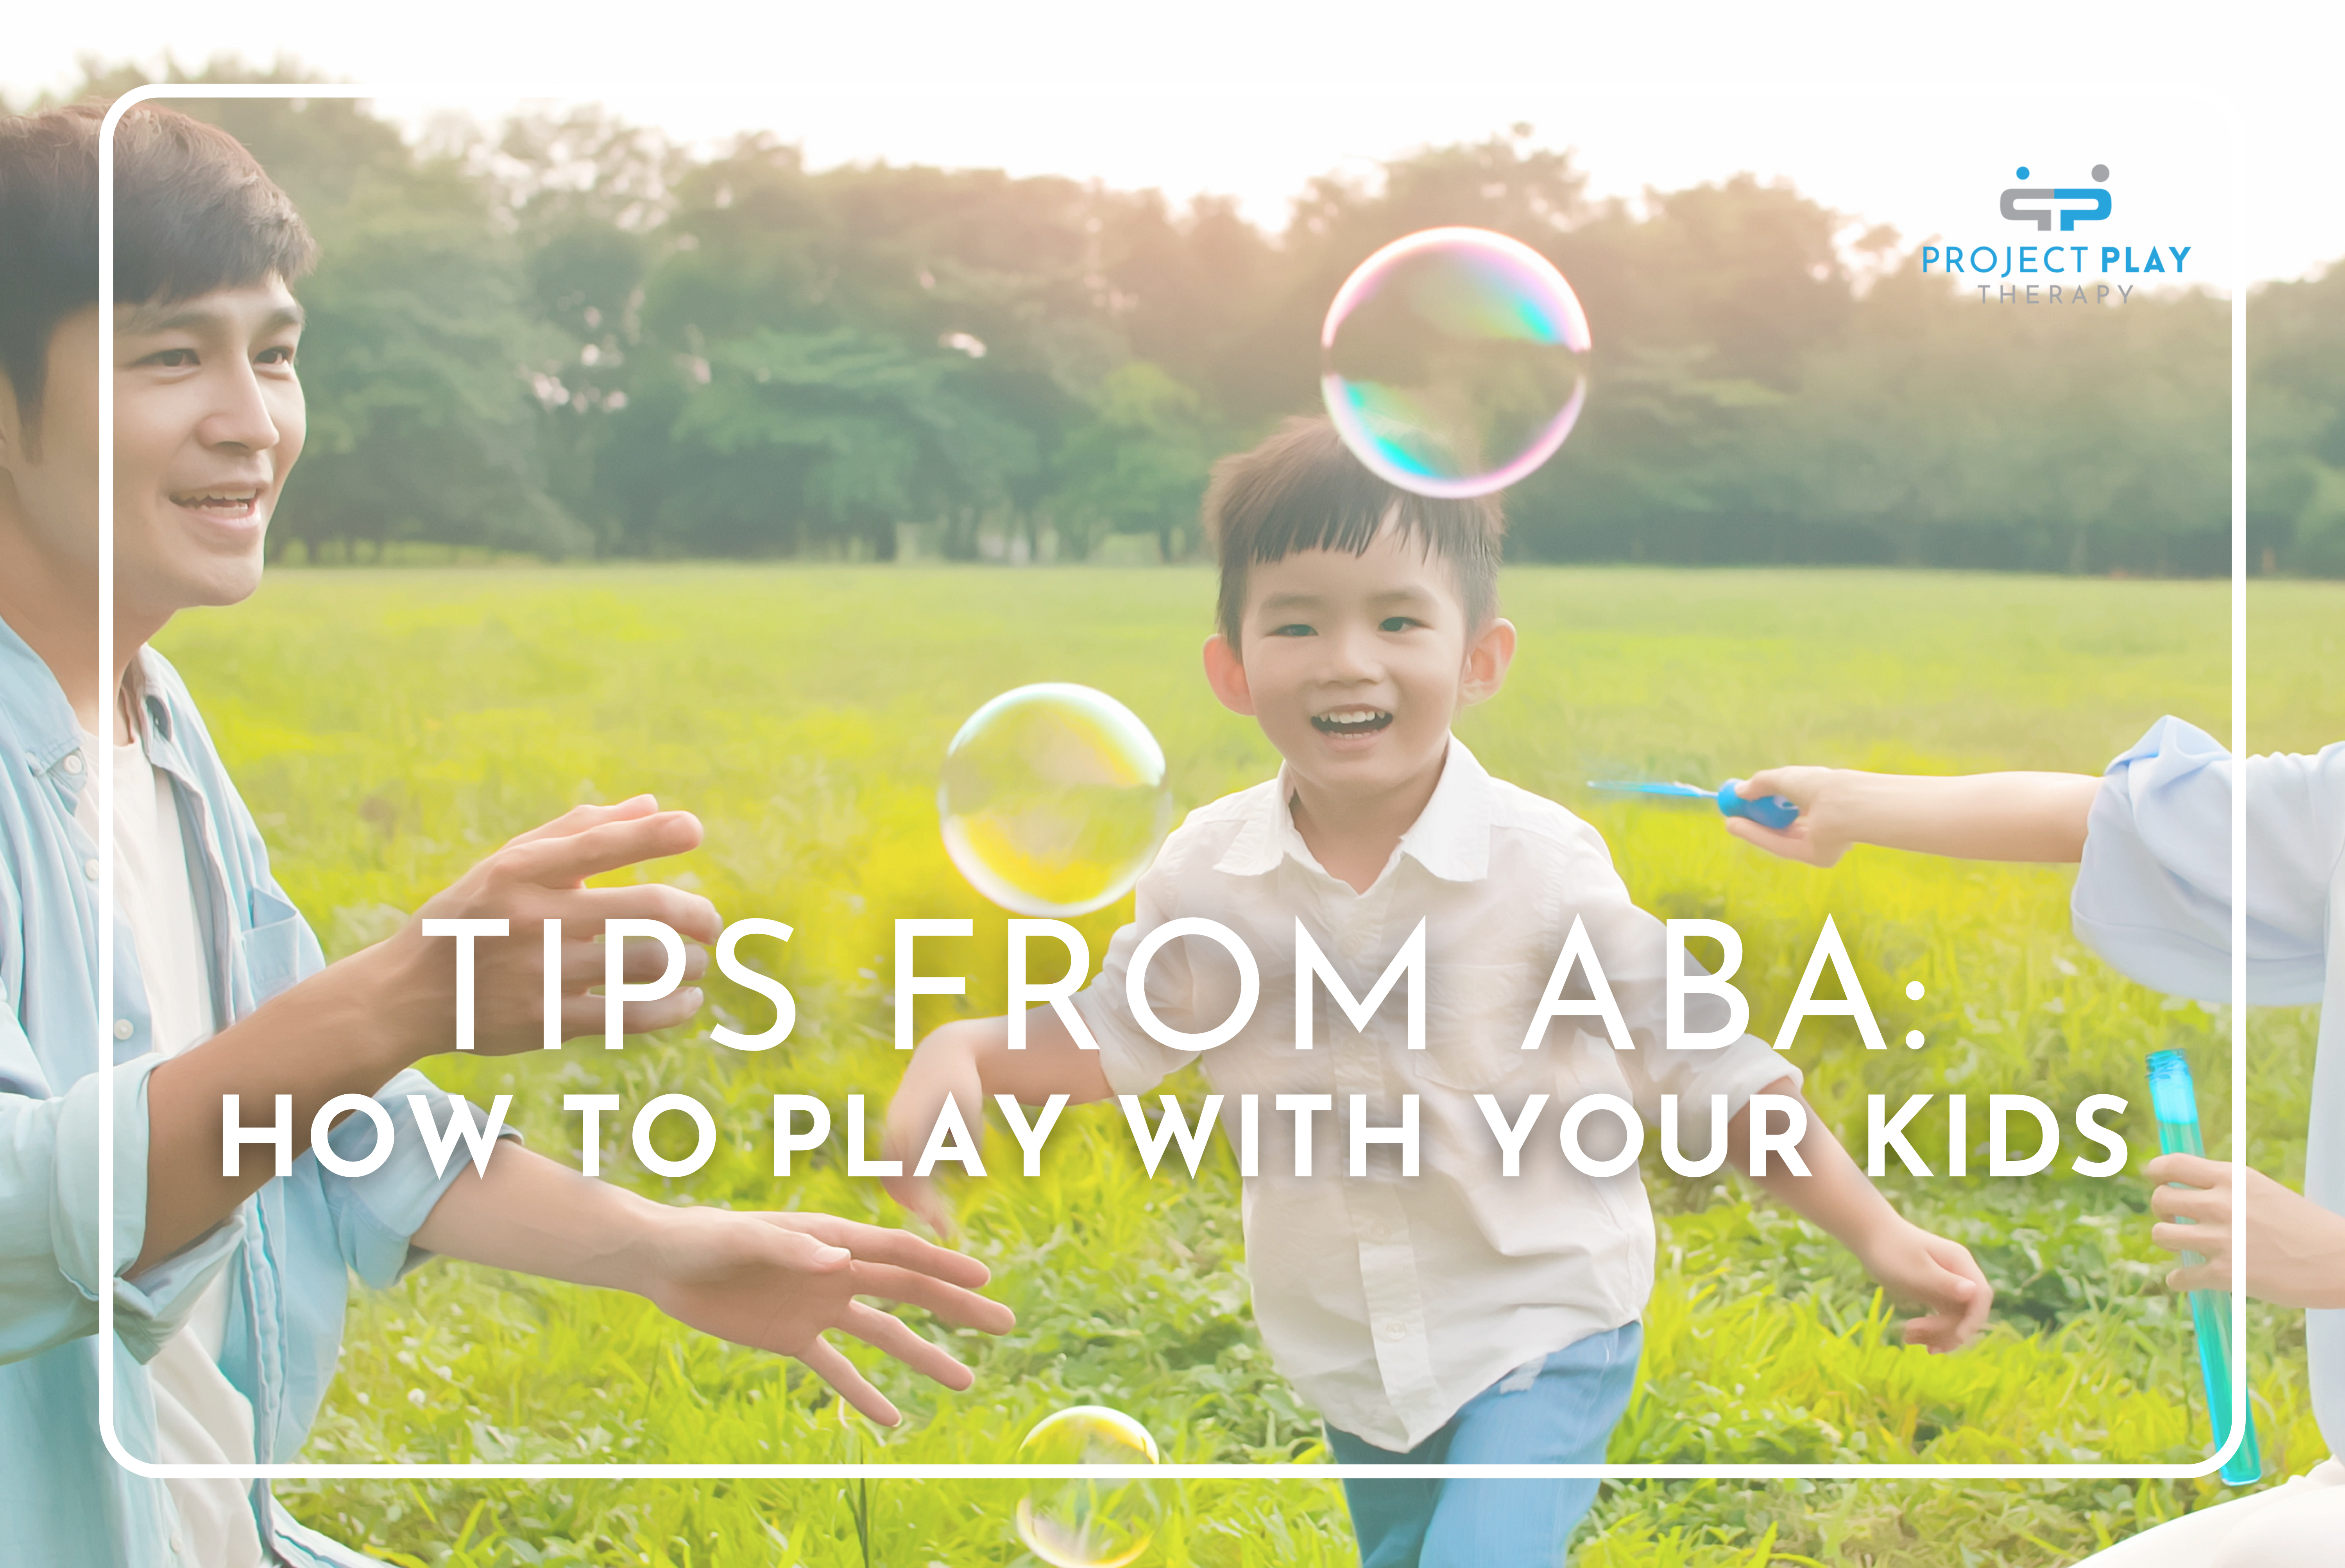 Tips from ABA: How to Play with Your Kids